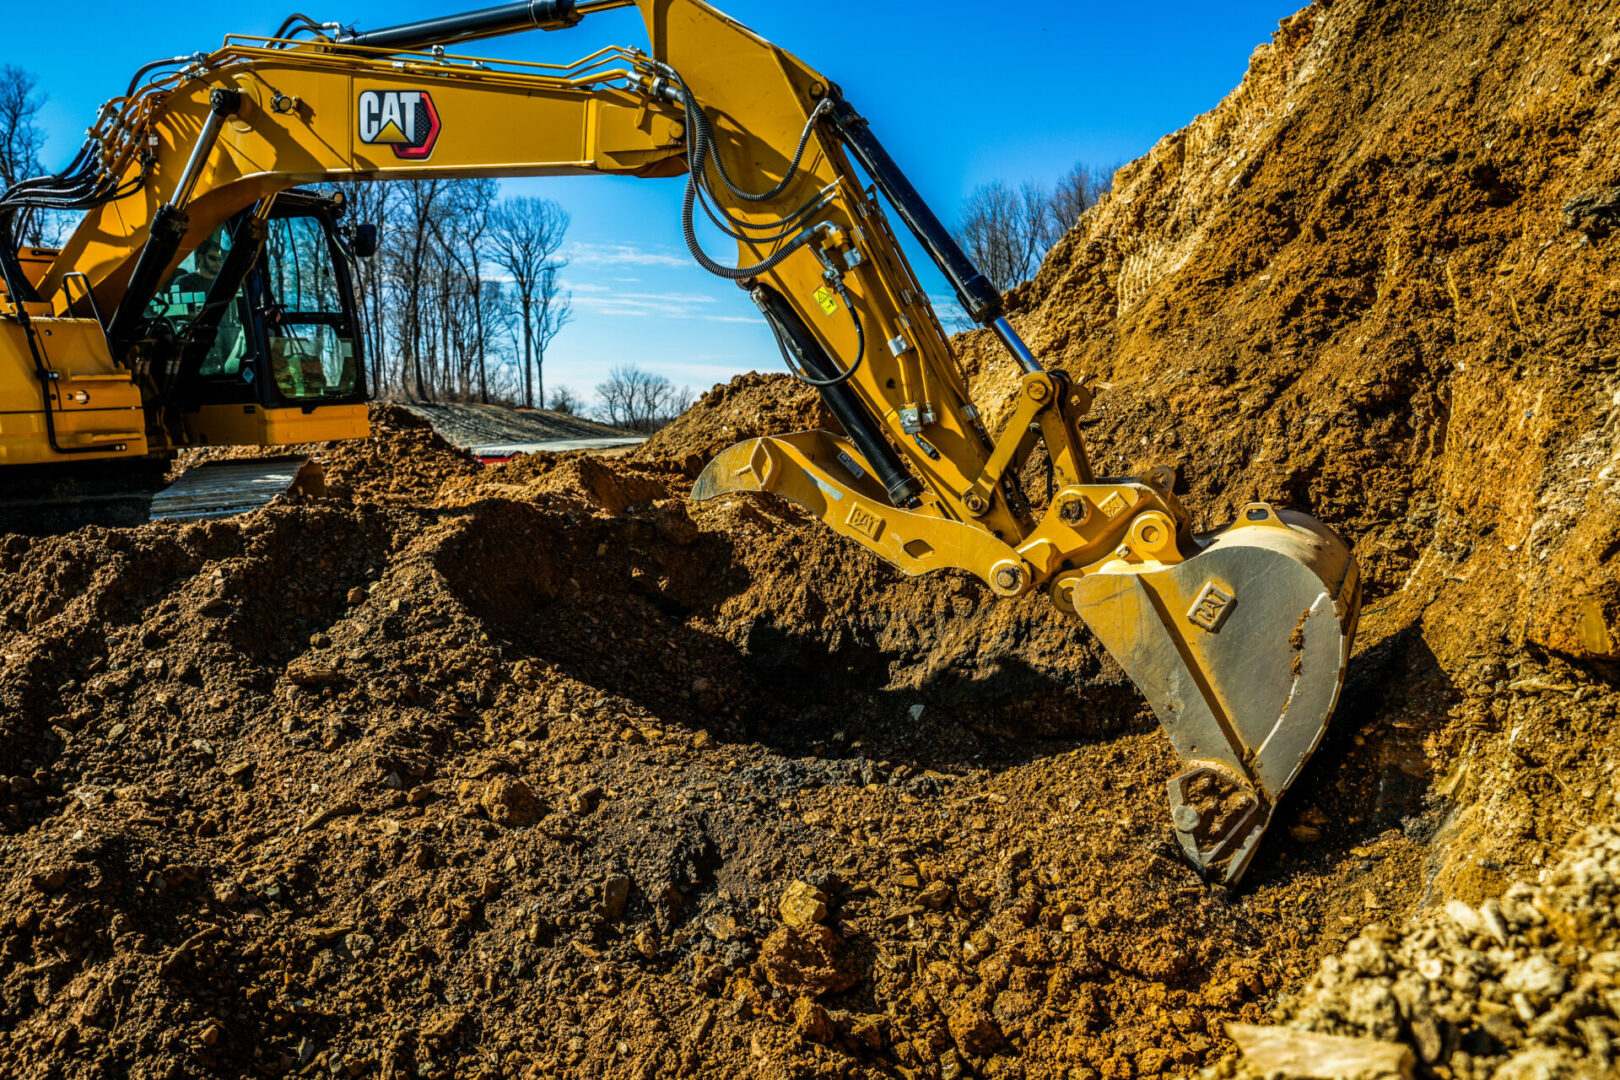 A caterpillar excavator is performing site work, digging into a pile of dirt.